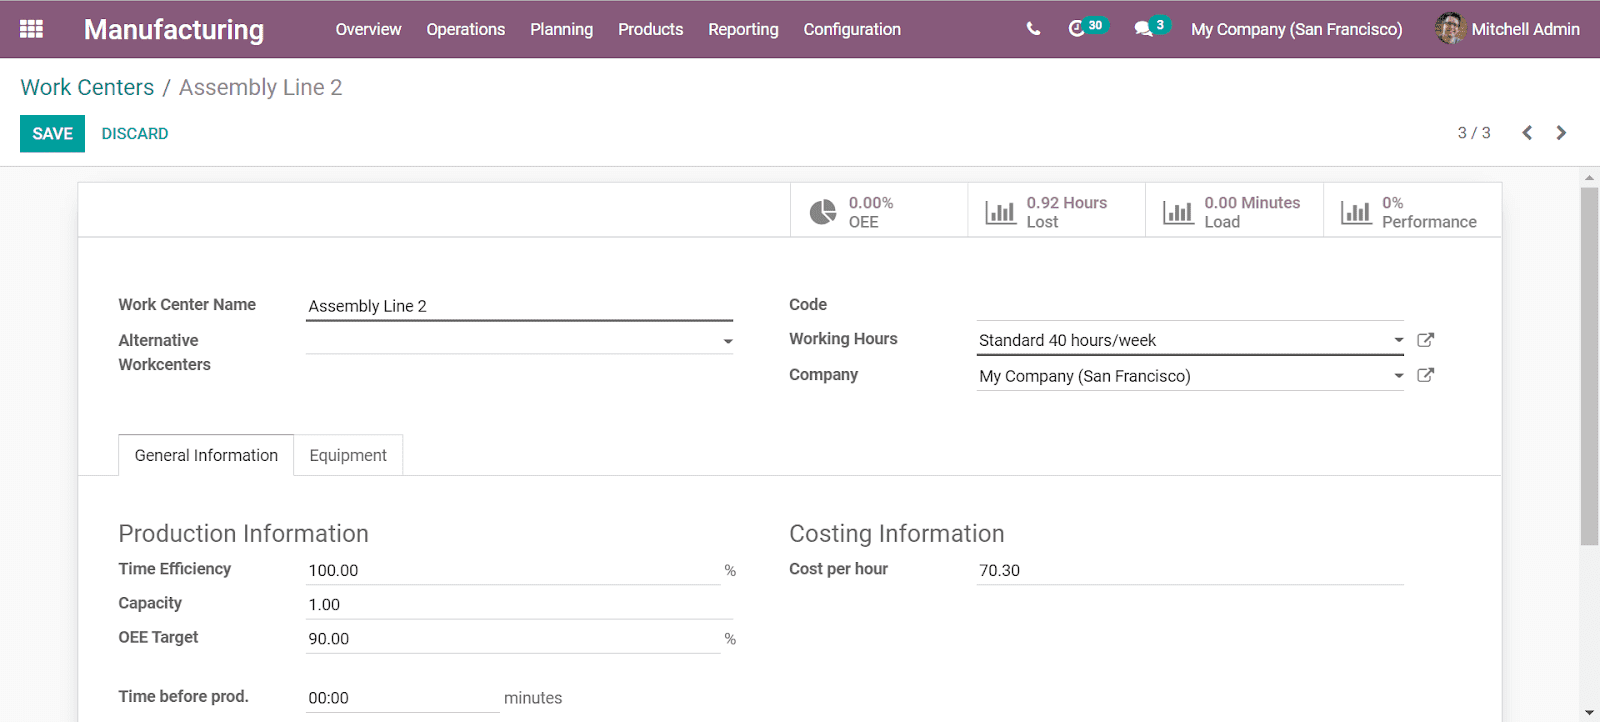 handle-manufacturing-orders-effectively-with-odoo-cybrosys